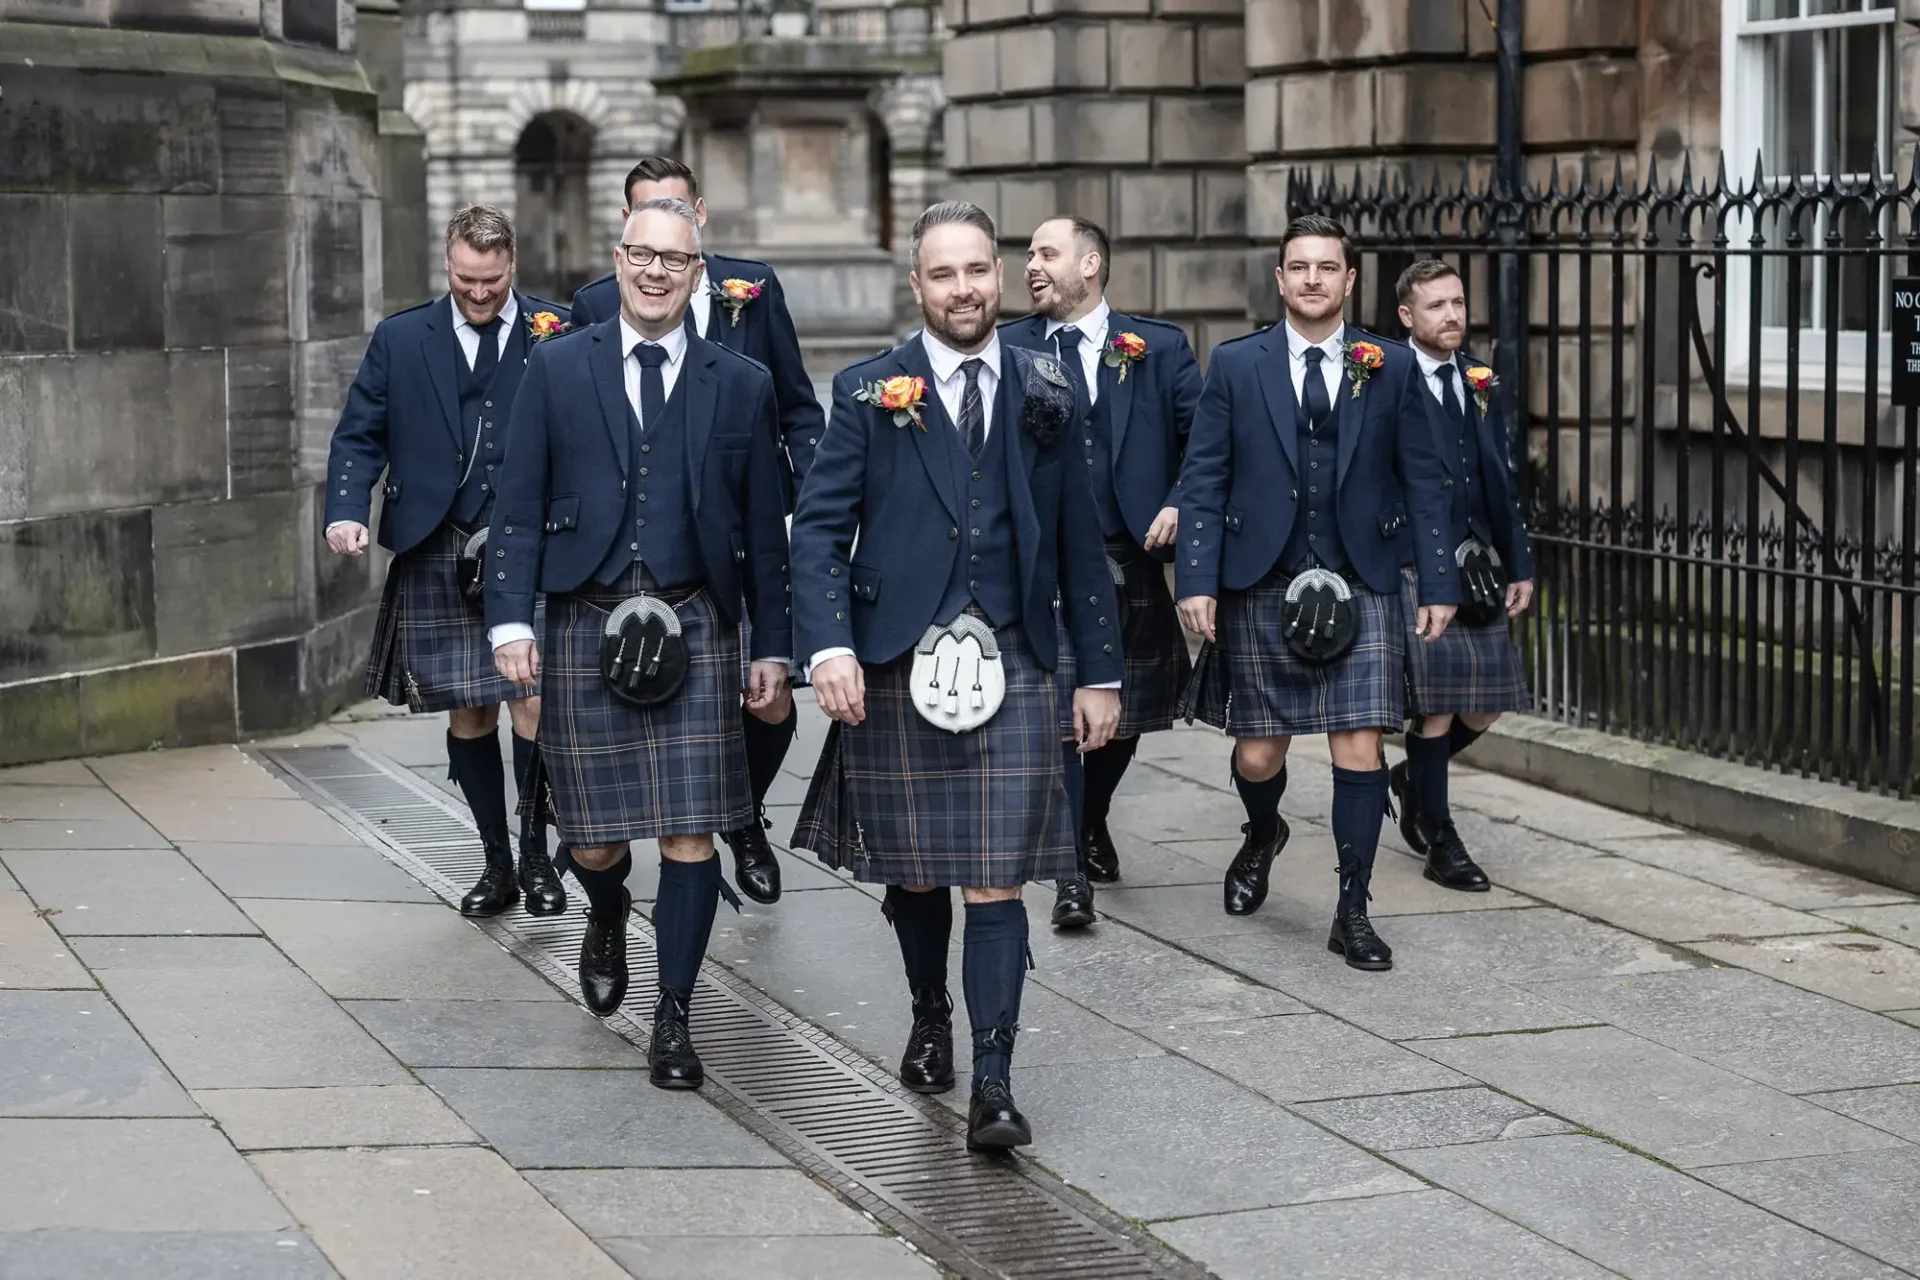 A group of six smiling men in traditional scottish attire, including kilts and sporran, walking together on a city street.